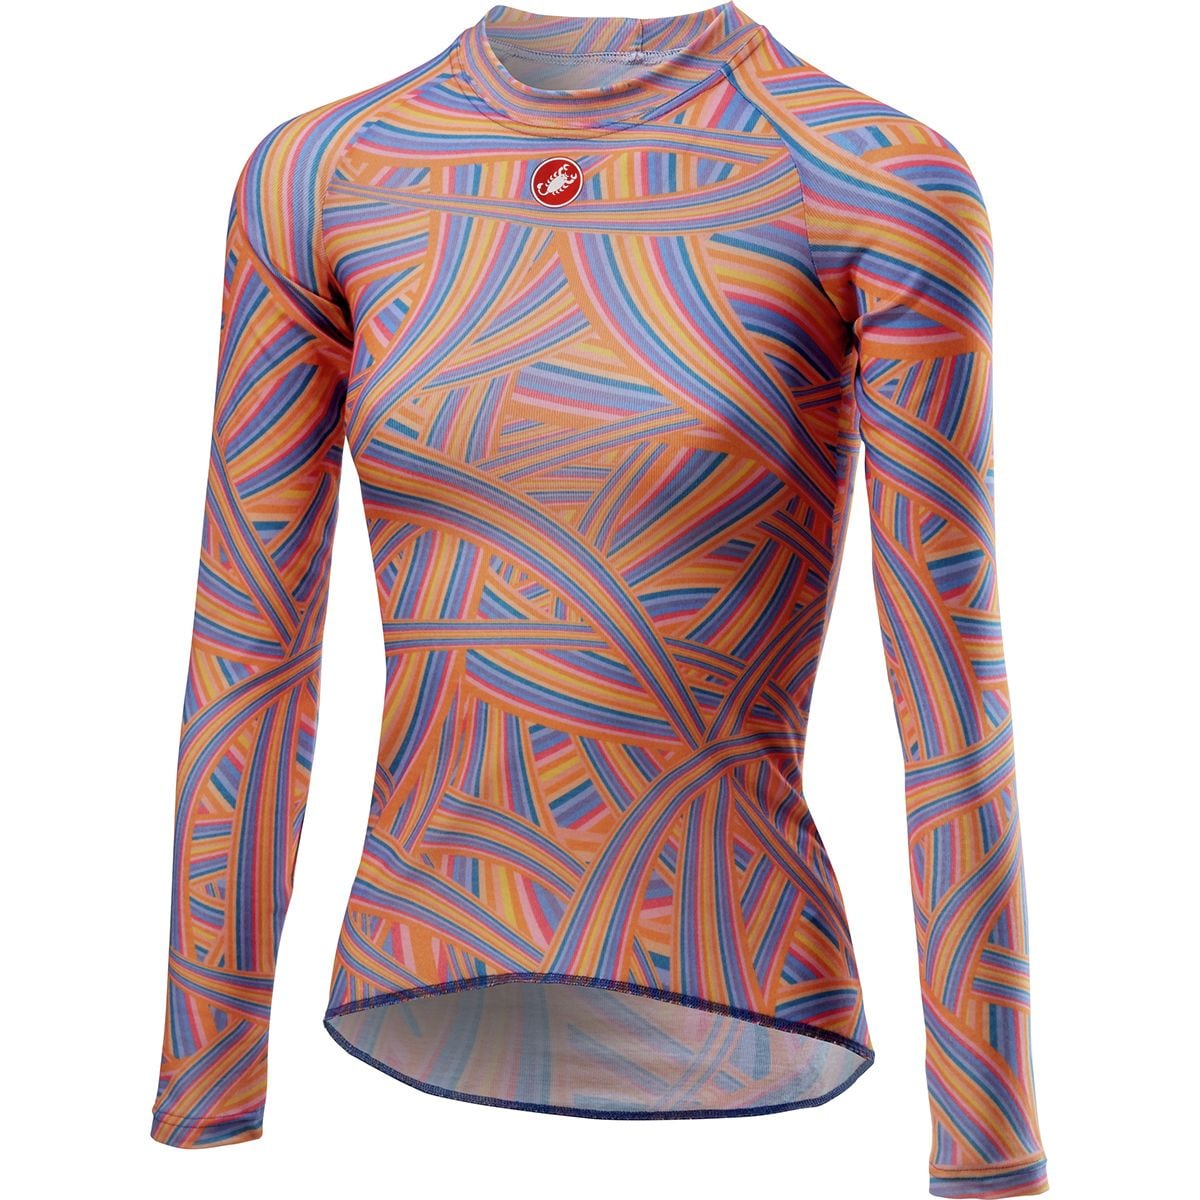 Castelli Prosecco R Long-Sleeve Base Layer Top - Women's